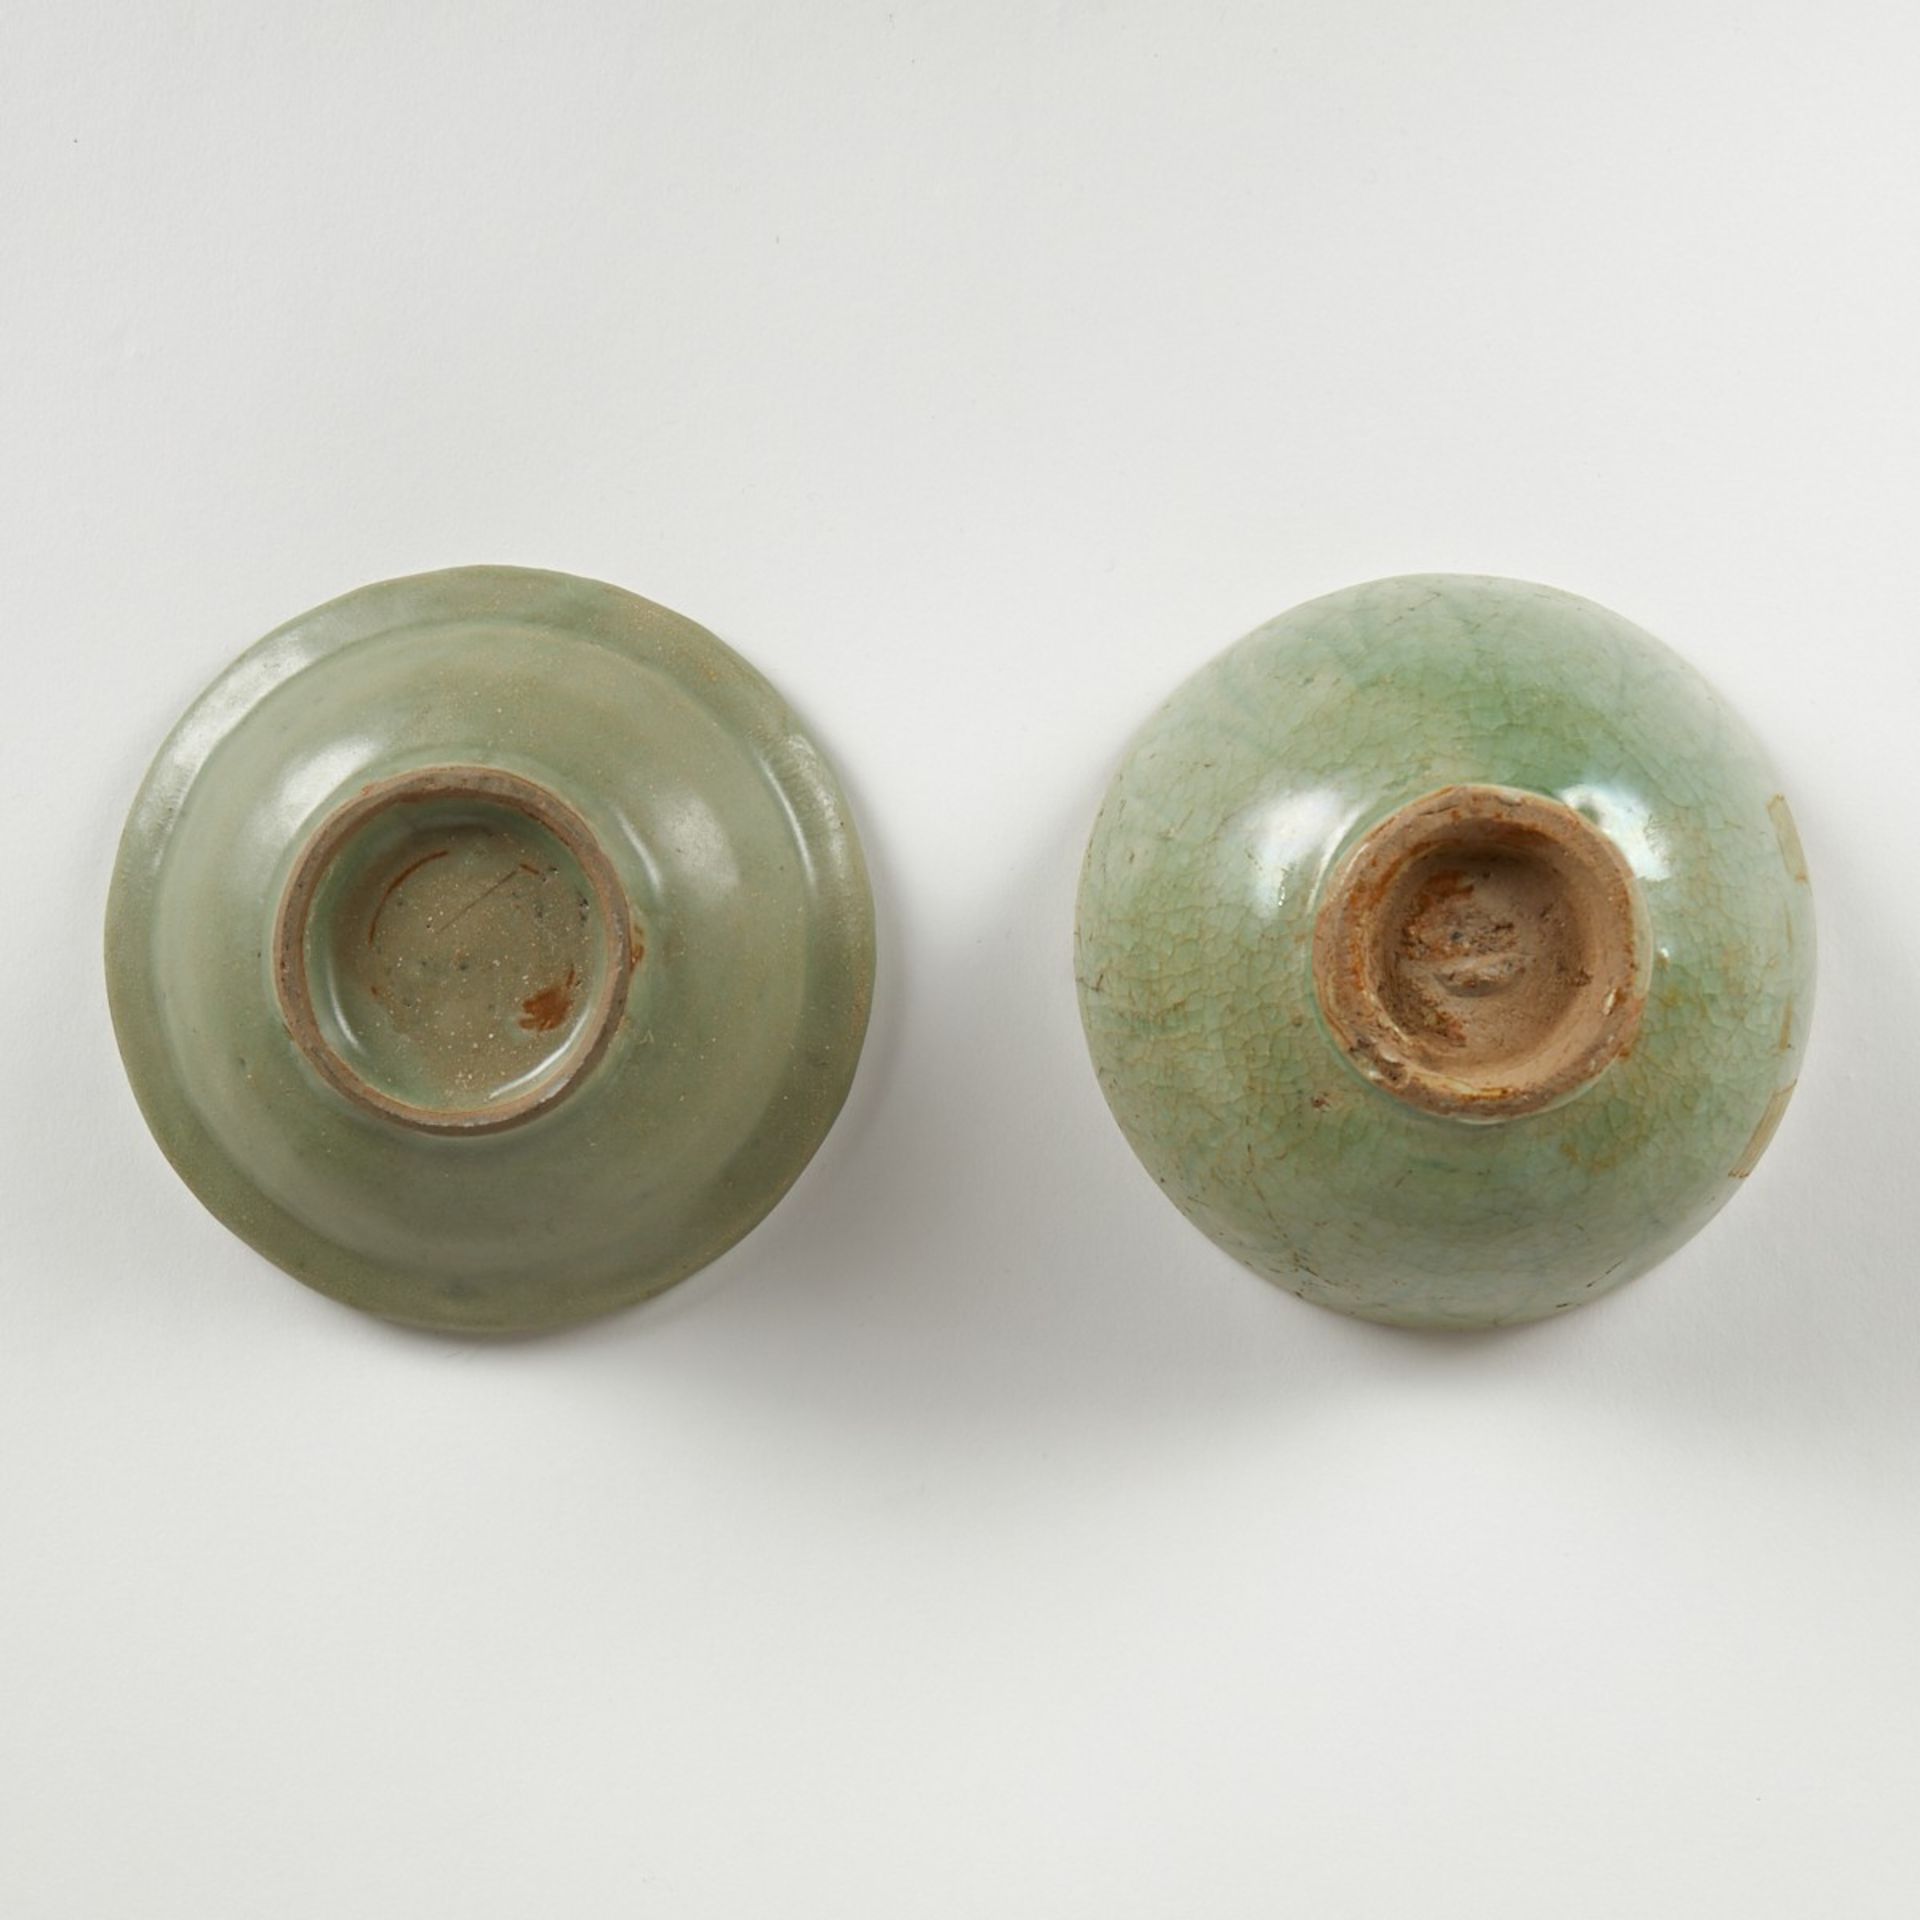 Grp: 2 Chinese Ming Dynasty Lonquan Celadon Dishes - Image 6 of 8